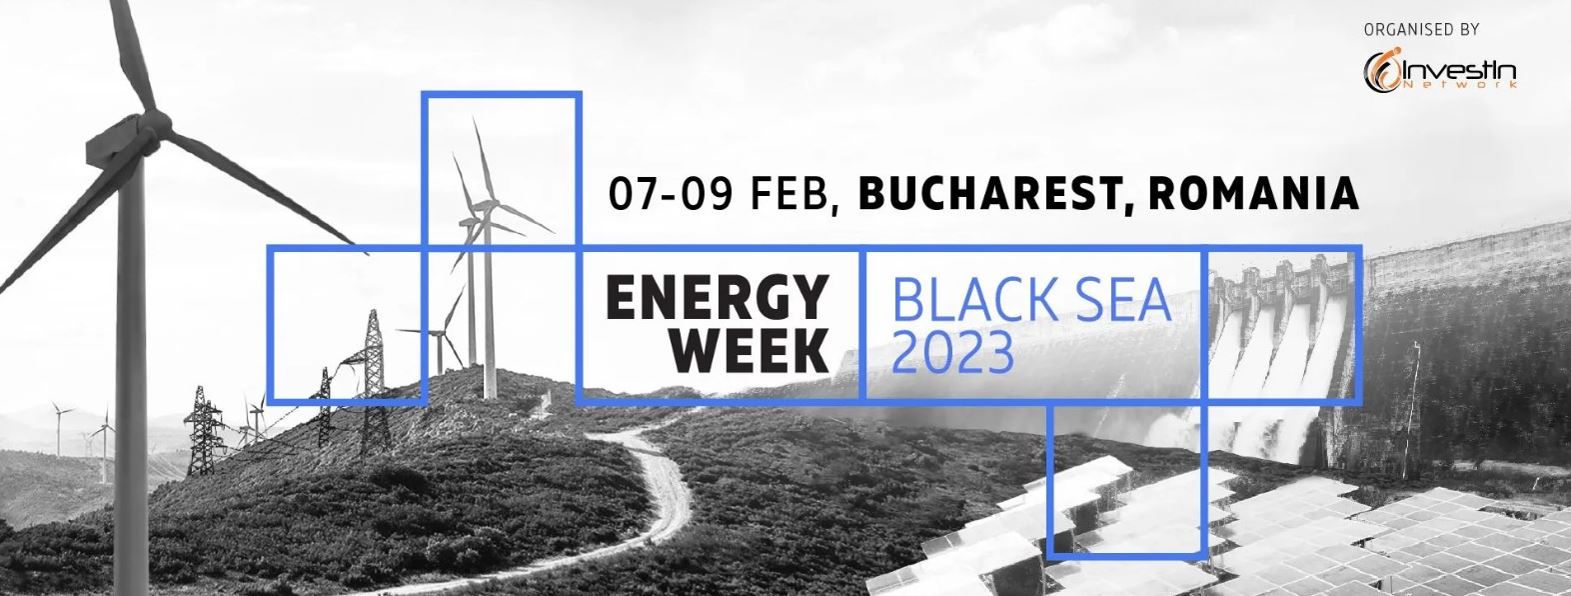 IENE actively participated in the “Energy Week Black Sea 2023” in Bucharest